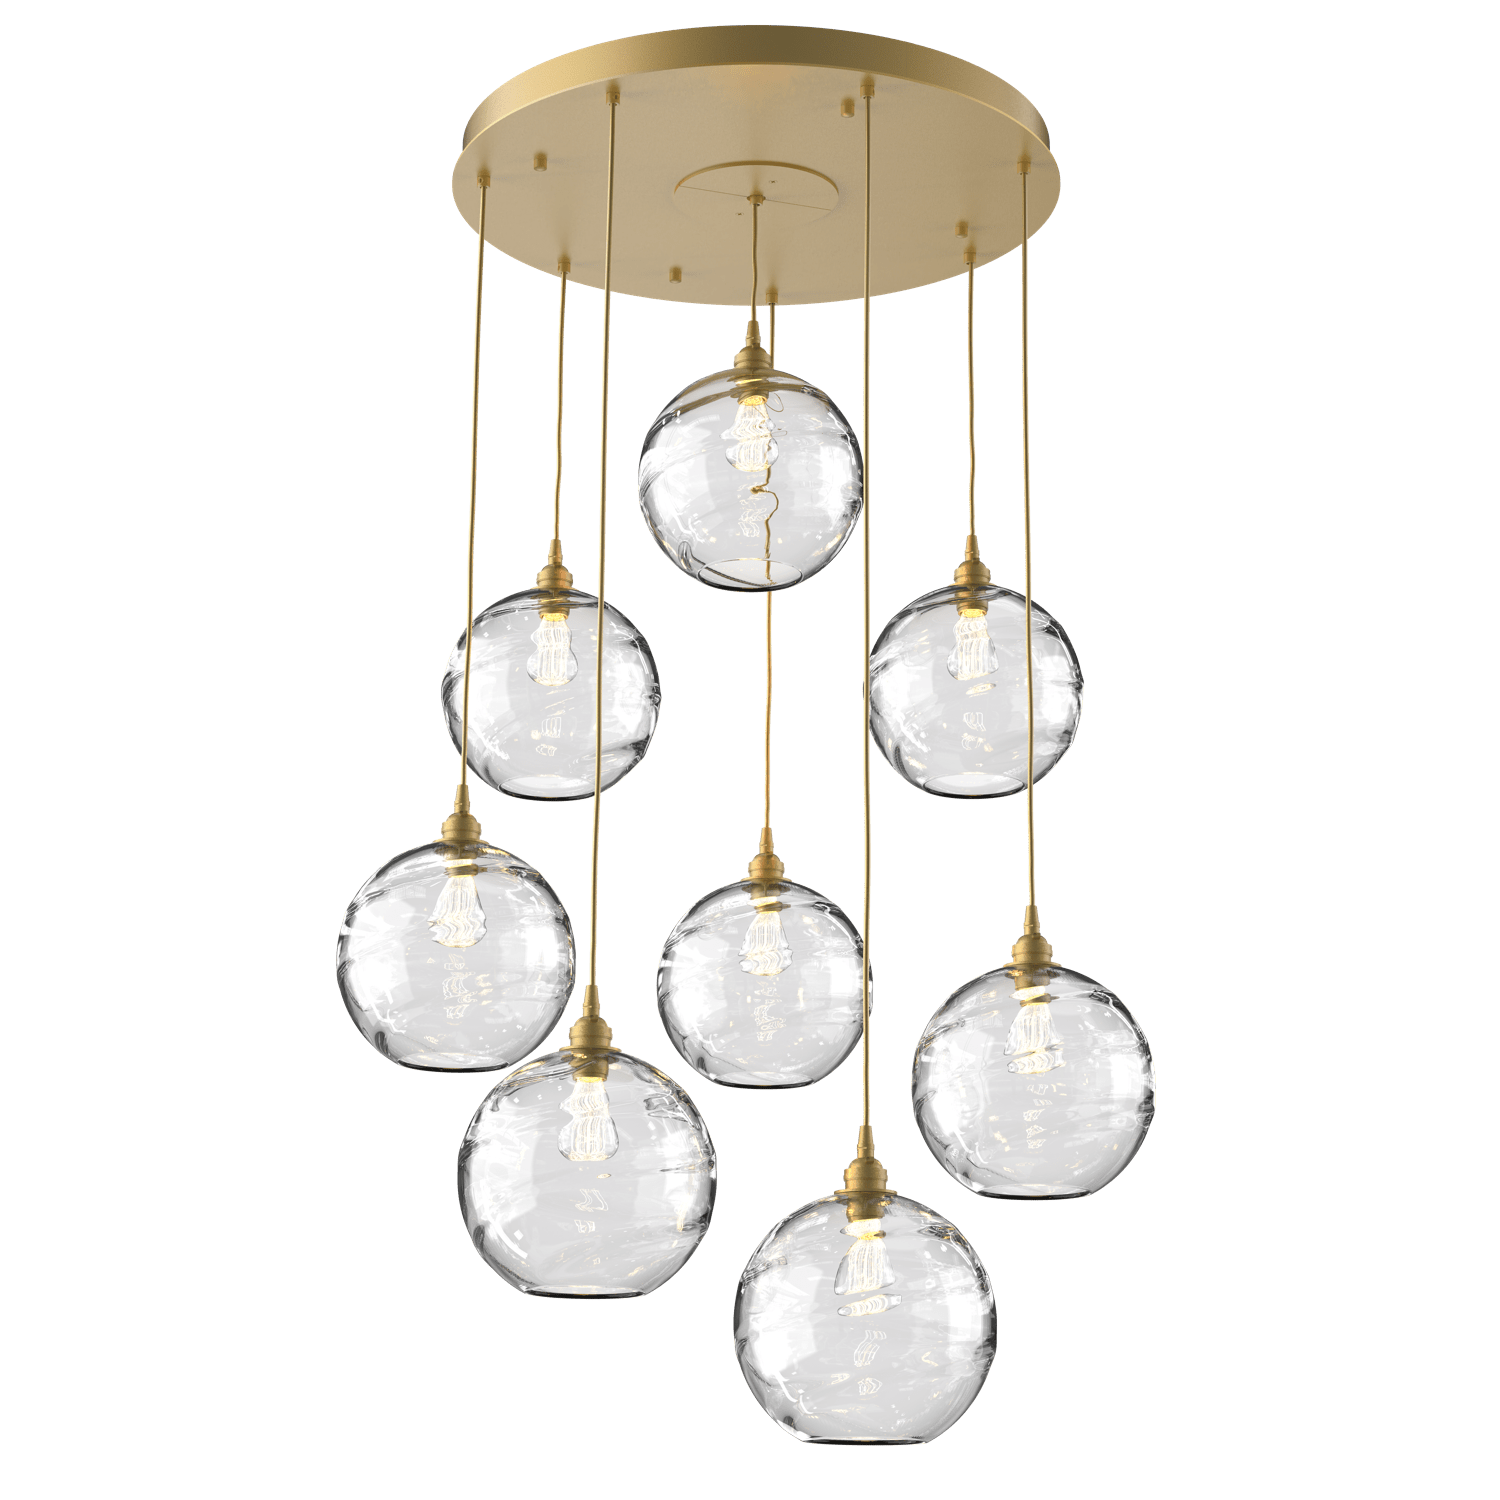 CHB0047-08-GB-OC-Hammerton-Studio-Optic-Blown-Glass-Terra-8-light-round-pendant-chandelier-with-gilded-brass-finish-and-optic-clear-blown-glass-shades-and-incandescent-lamping